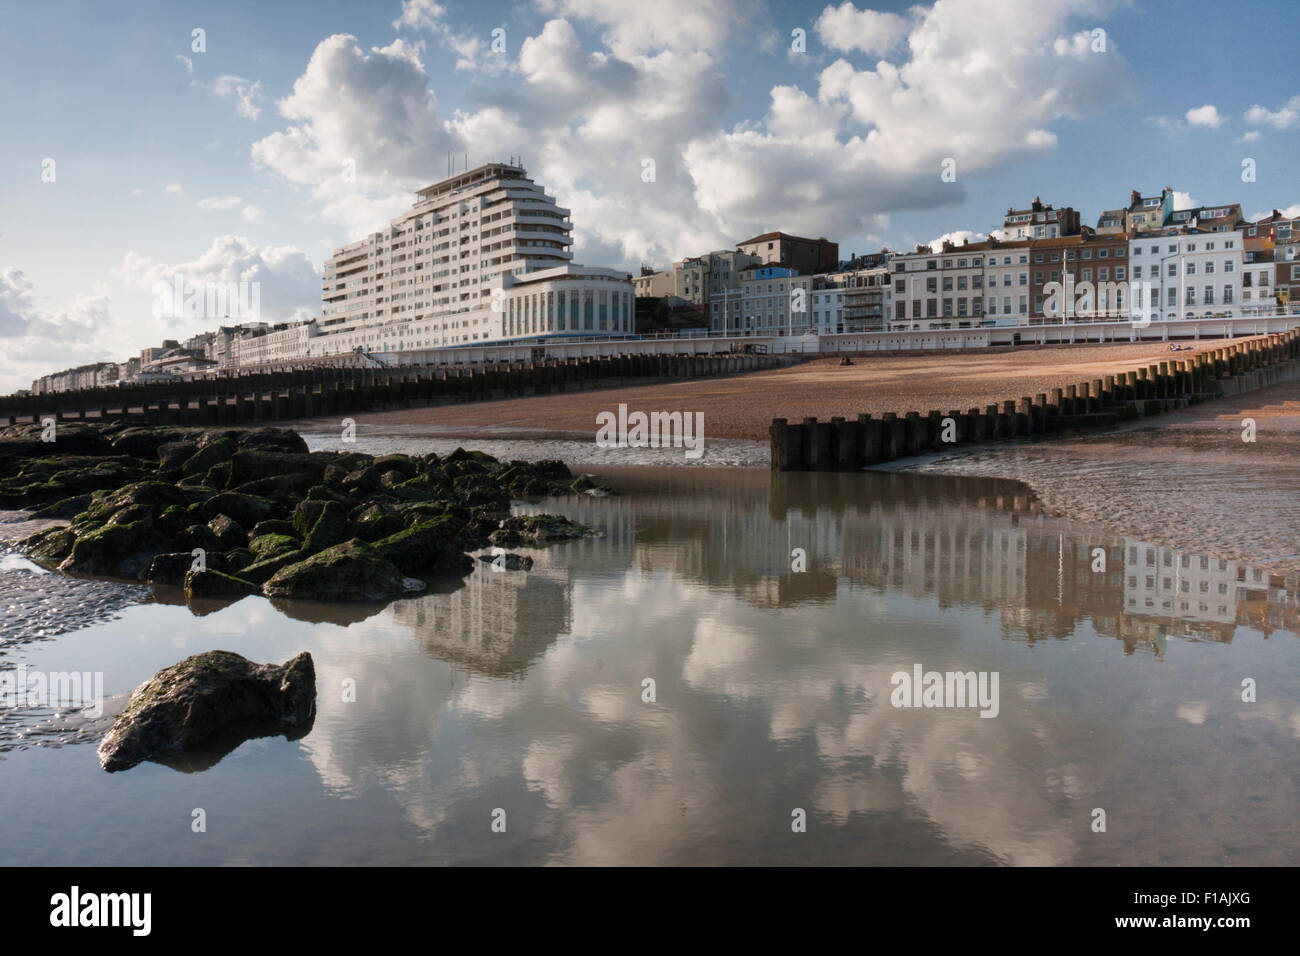 Marine Court, a 1930's art deco building, reflected in a tidal pool at St Leonards on Sea, East Sussex, England Stock Photo